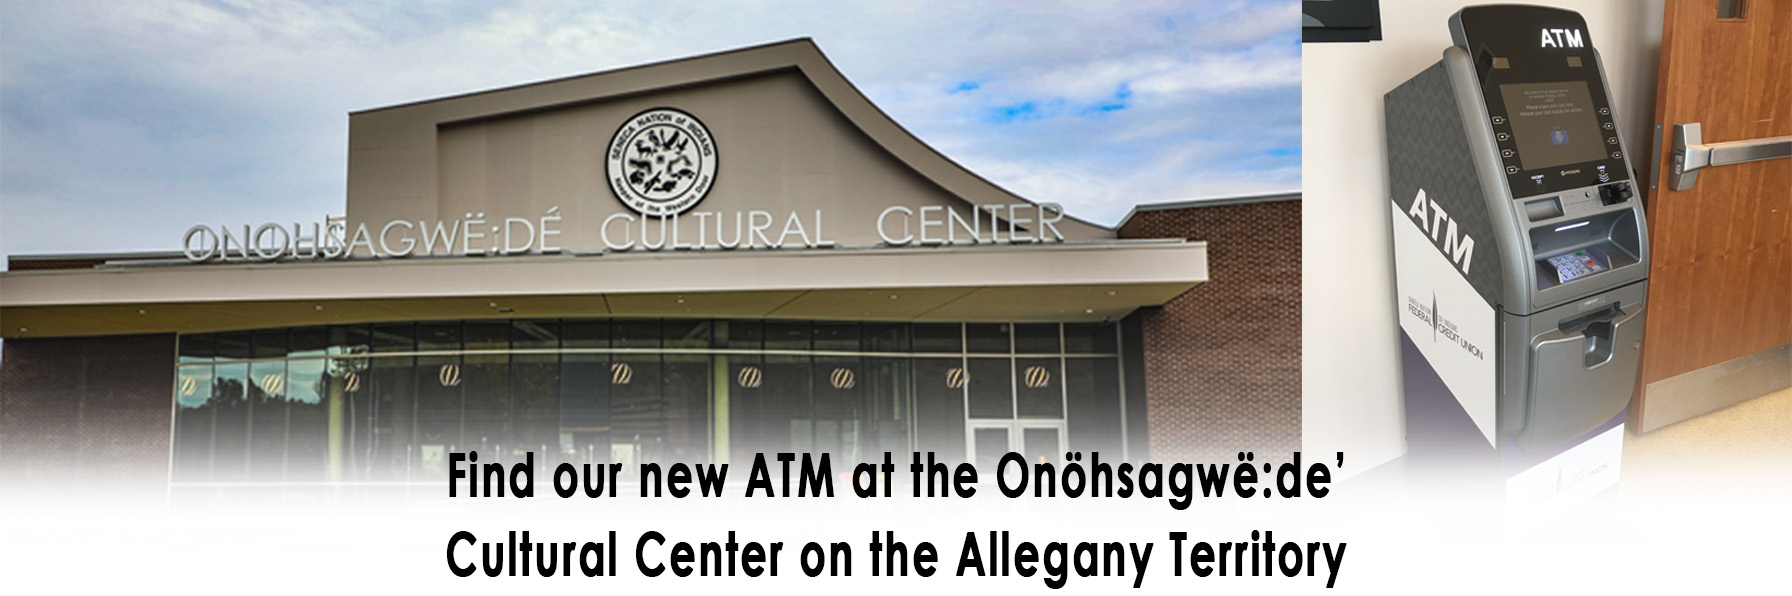 New ATM at community center